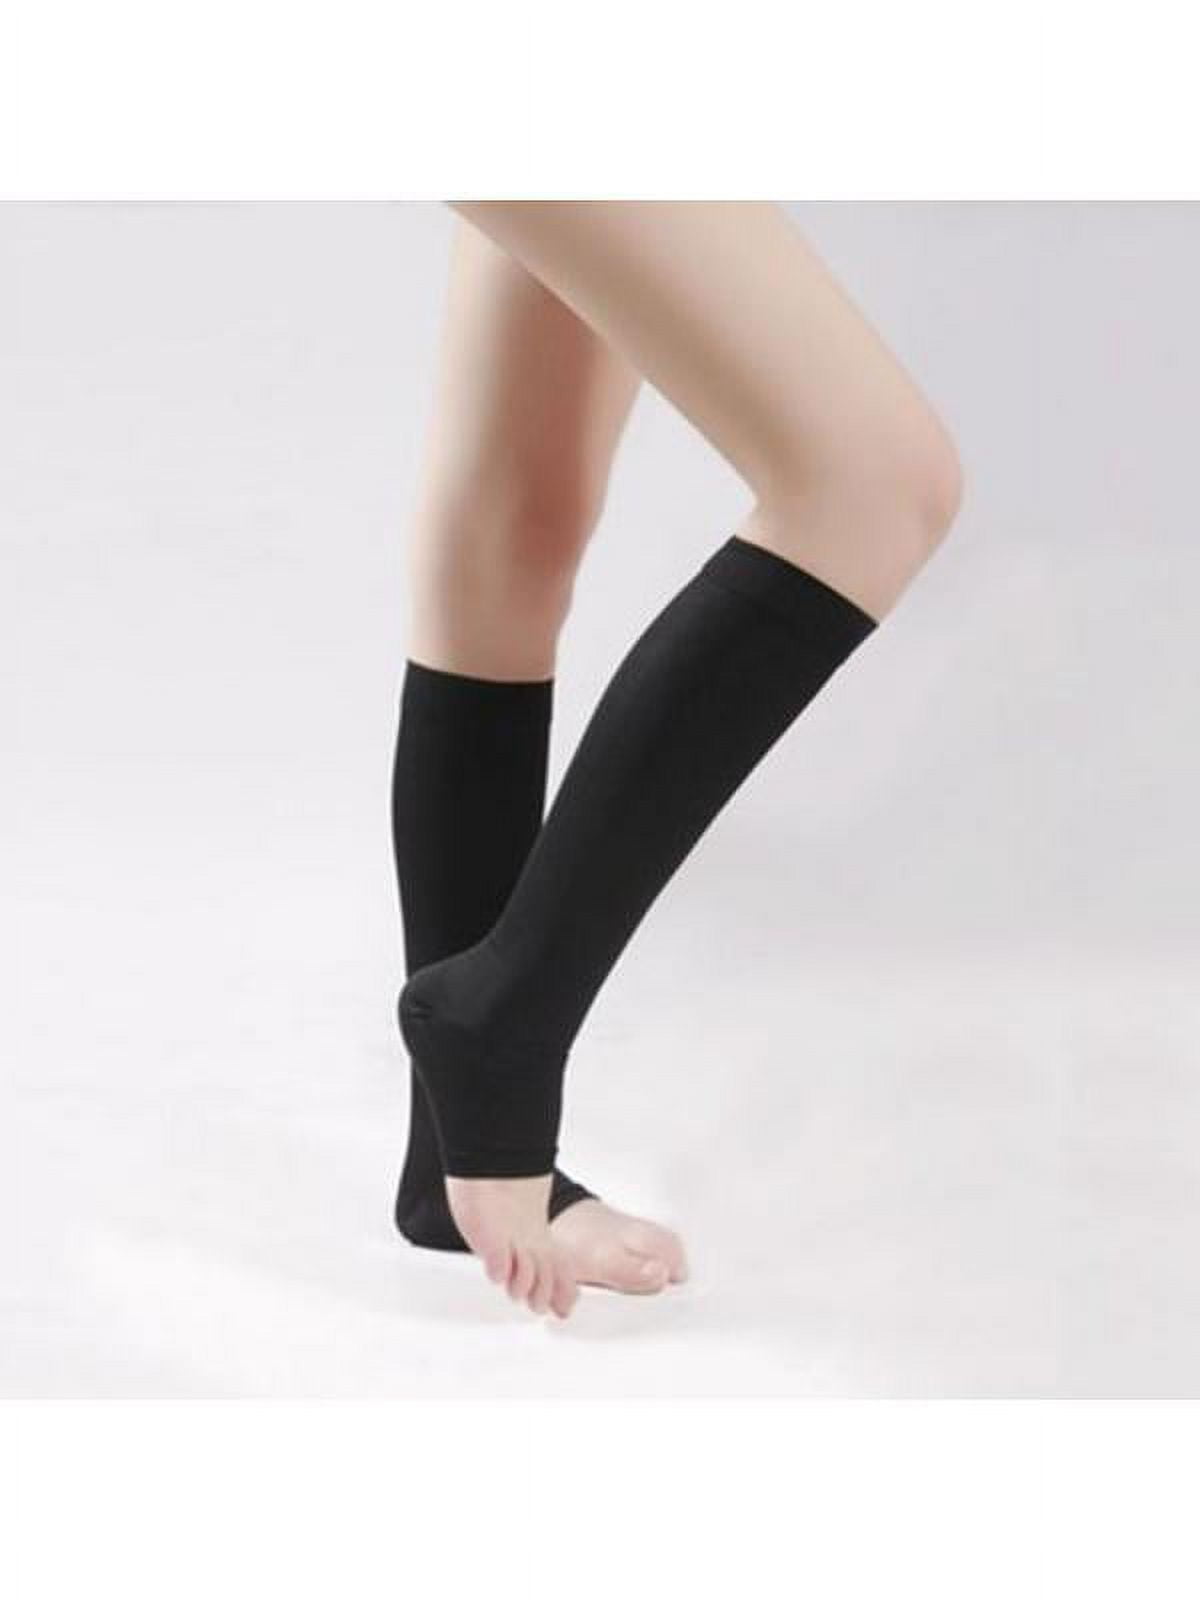 1Pairs Medical Compression Socks for Men Women Support Varicose Veins Open  Toe 18-24mmHg Stockings 